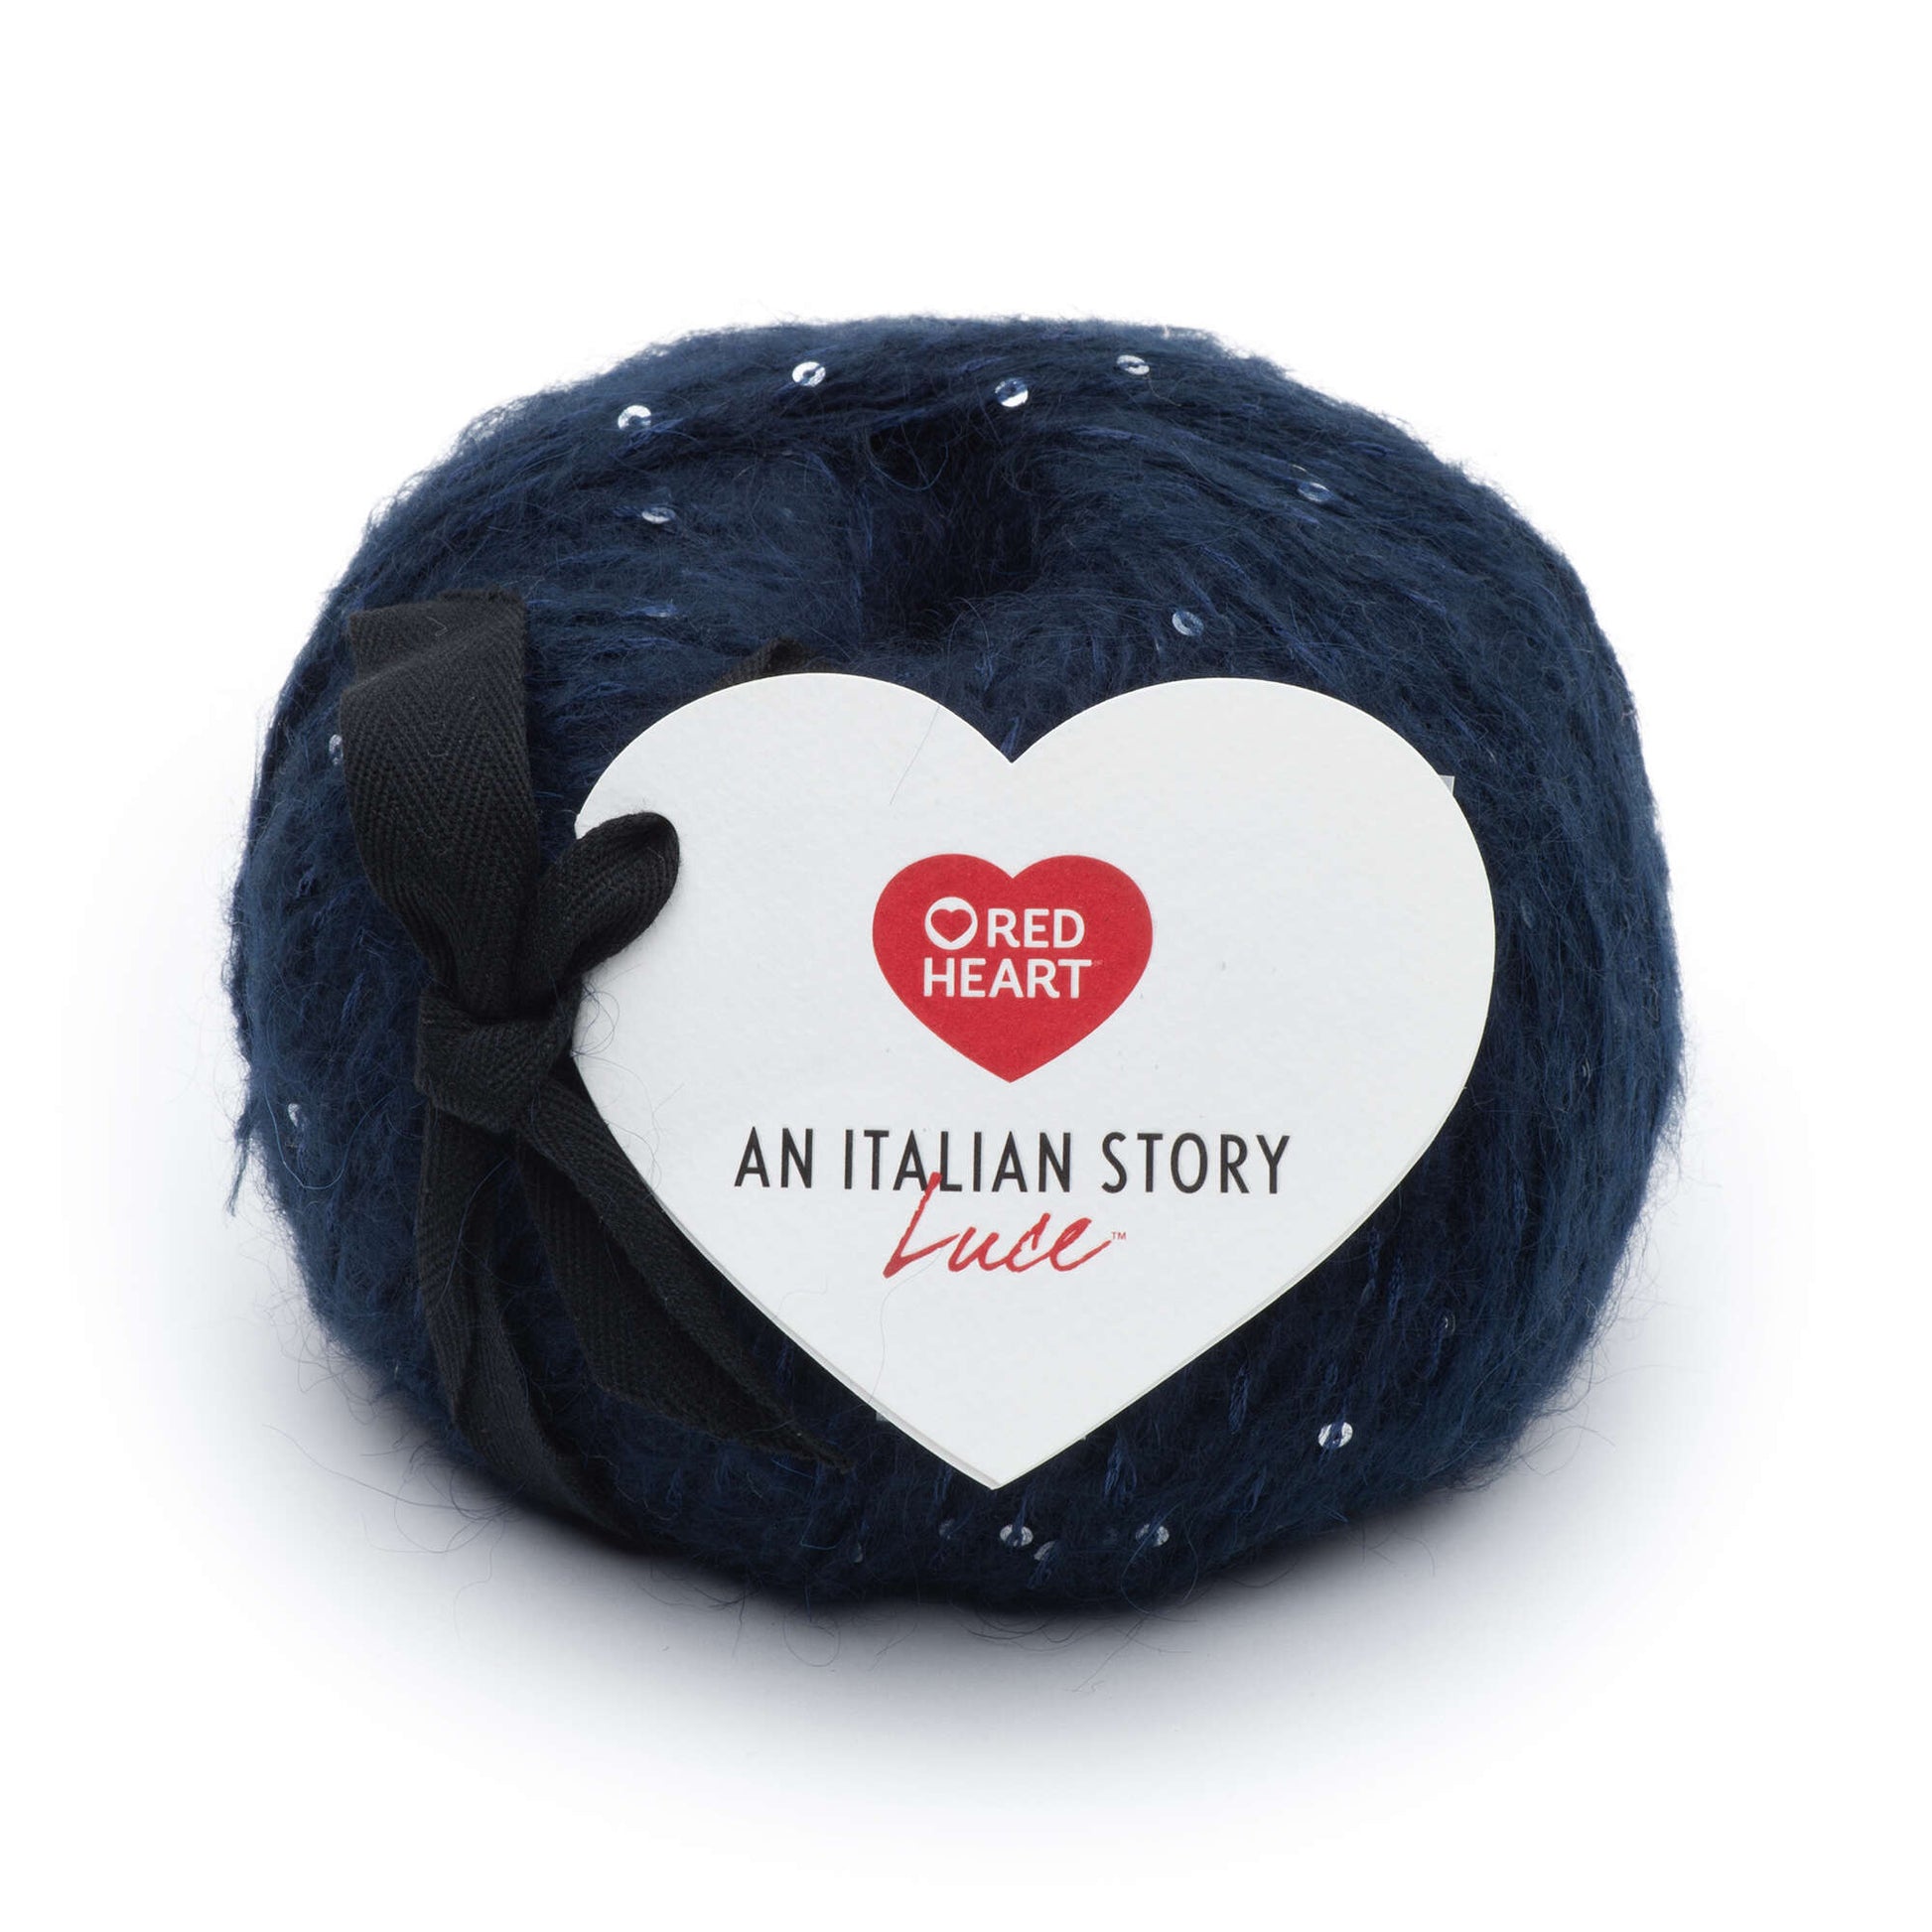 Red Heart An Italian Story Luce Yarn - Discontinued Shades